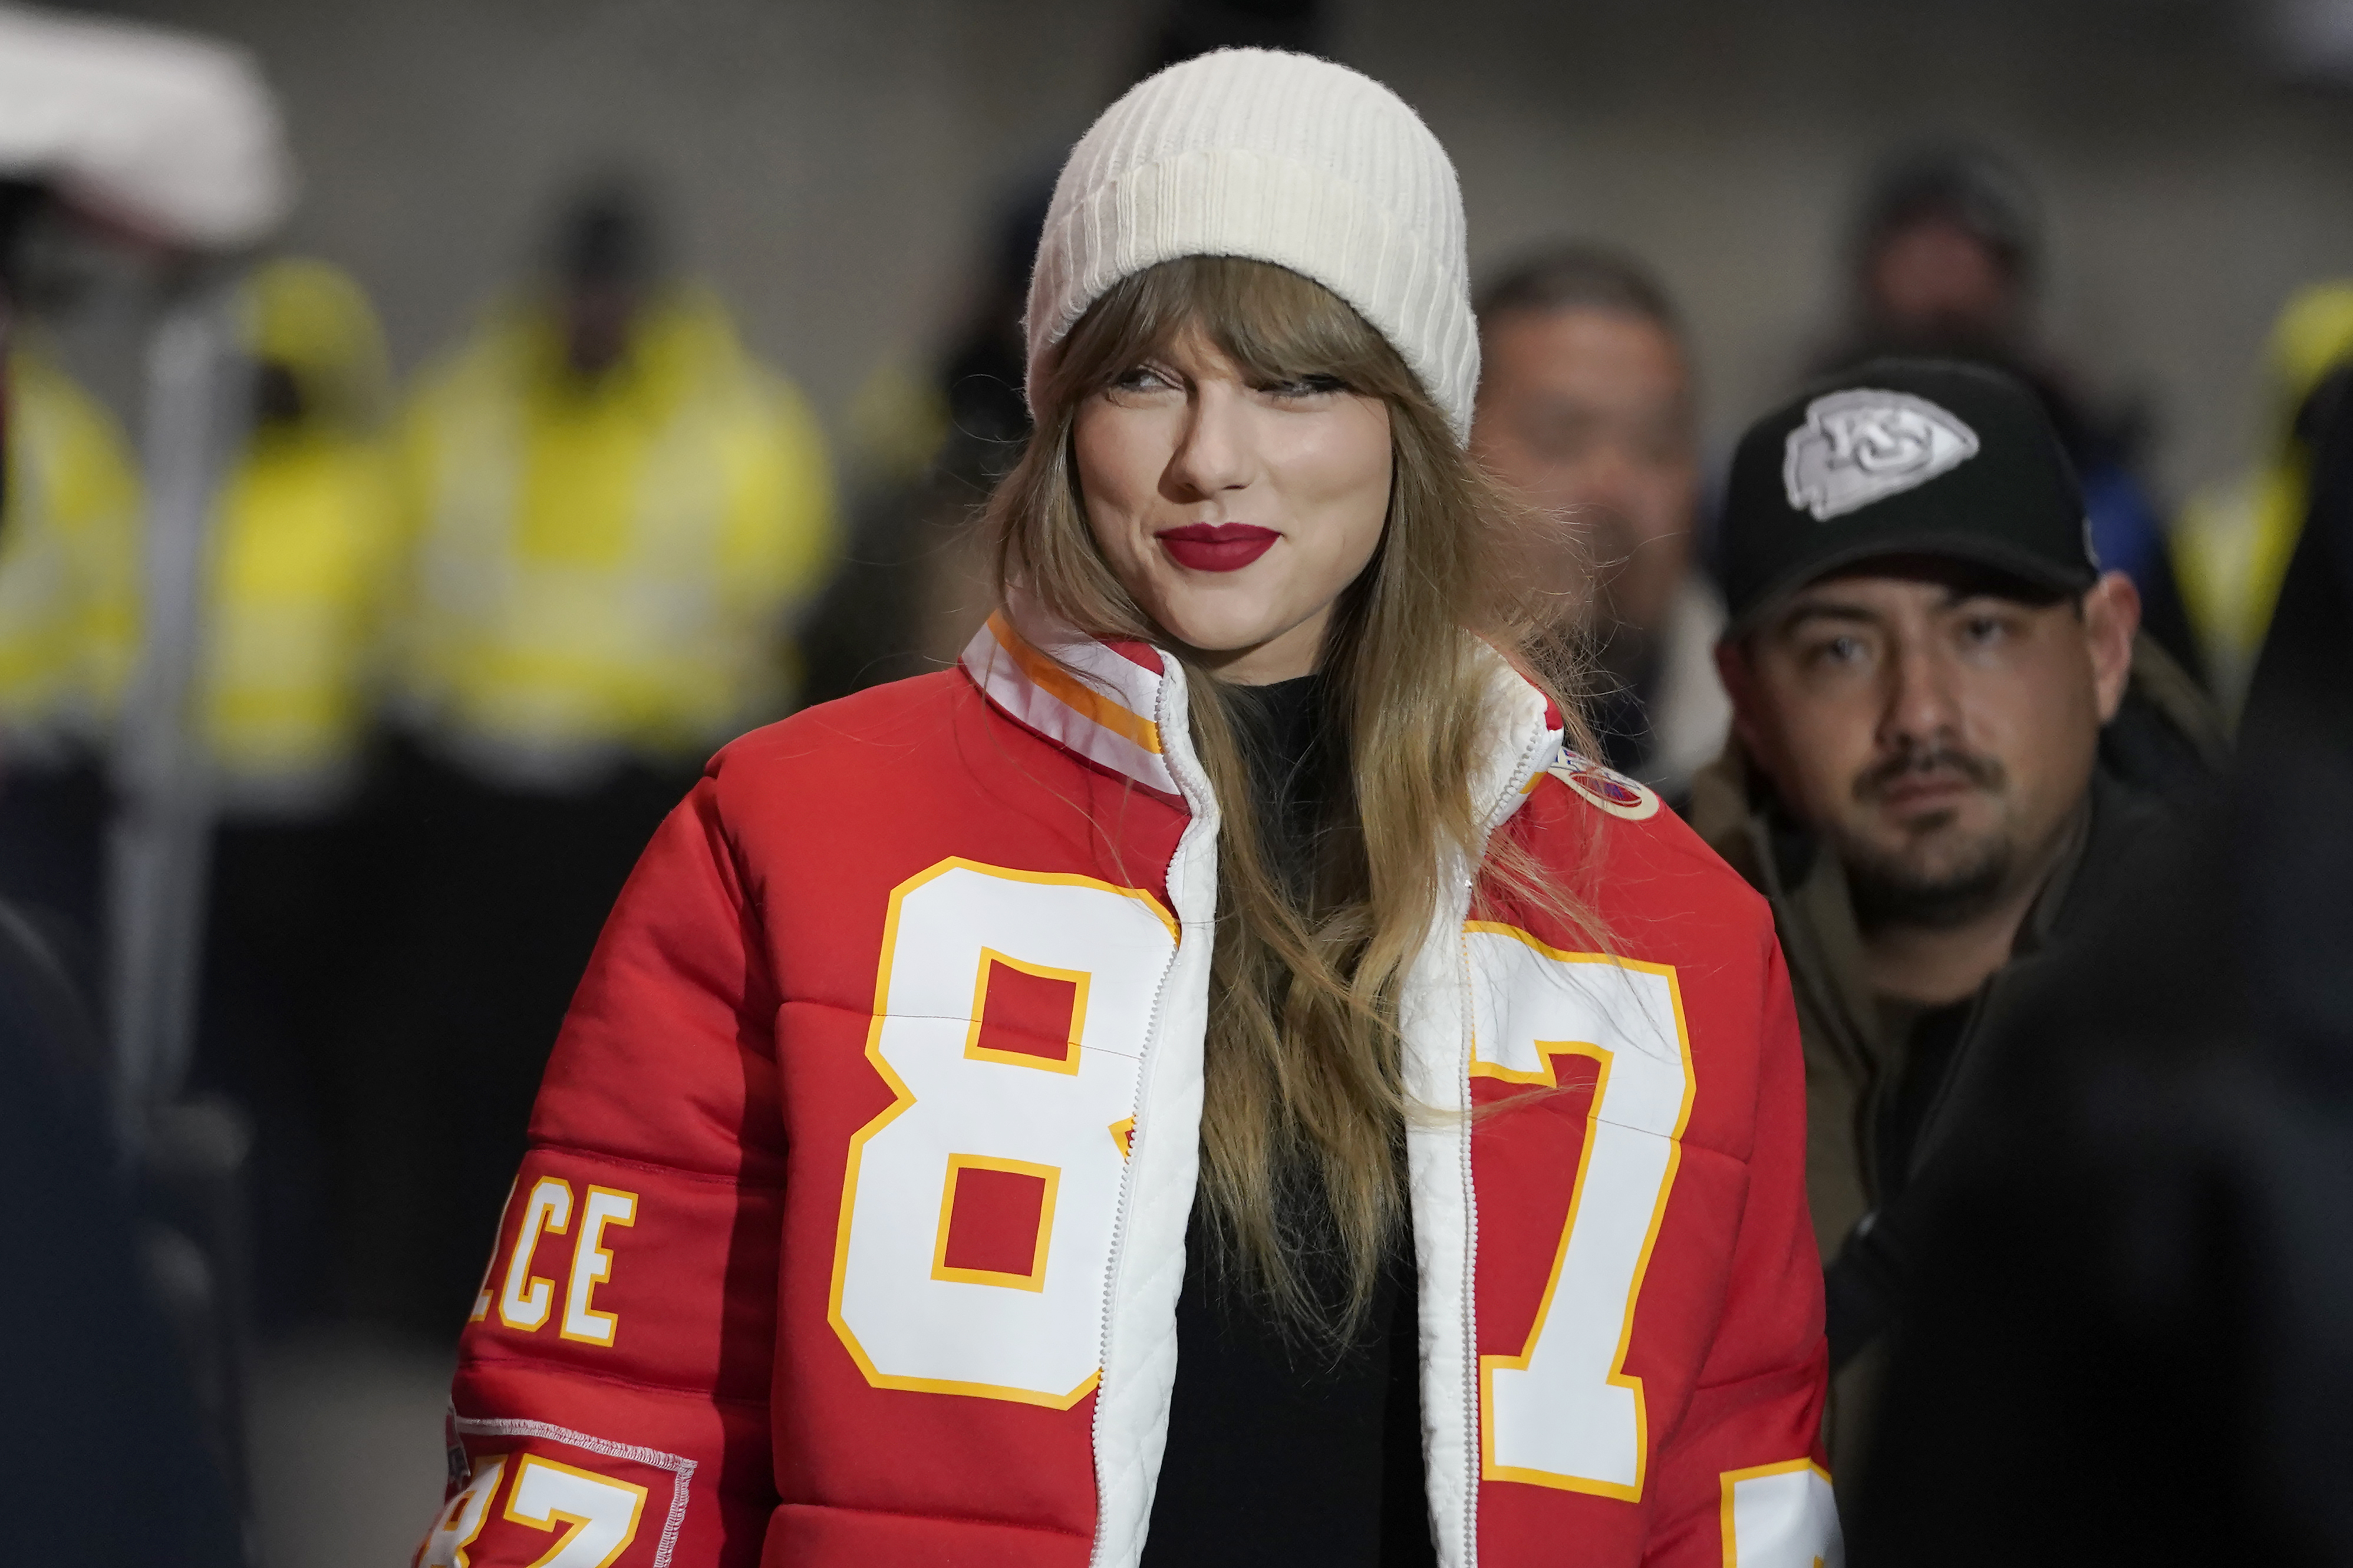 Total pinch me moment': Designer of Taylor Swift's custom Kelce jacket  shows her process